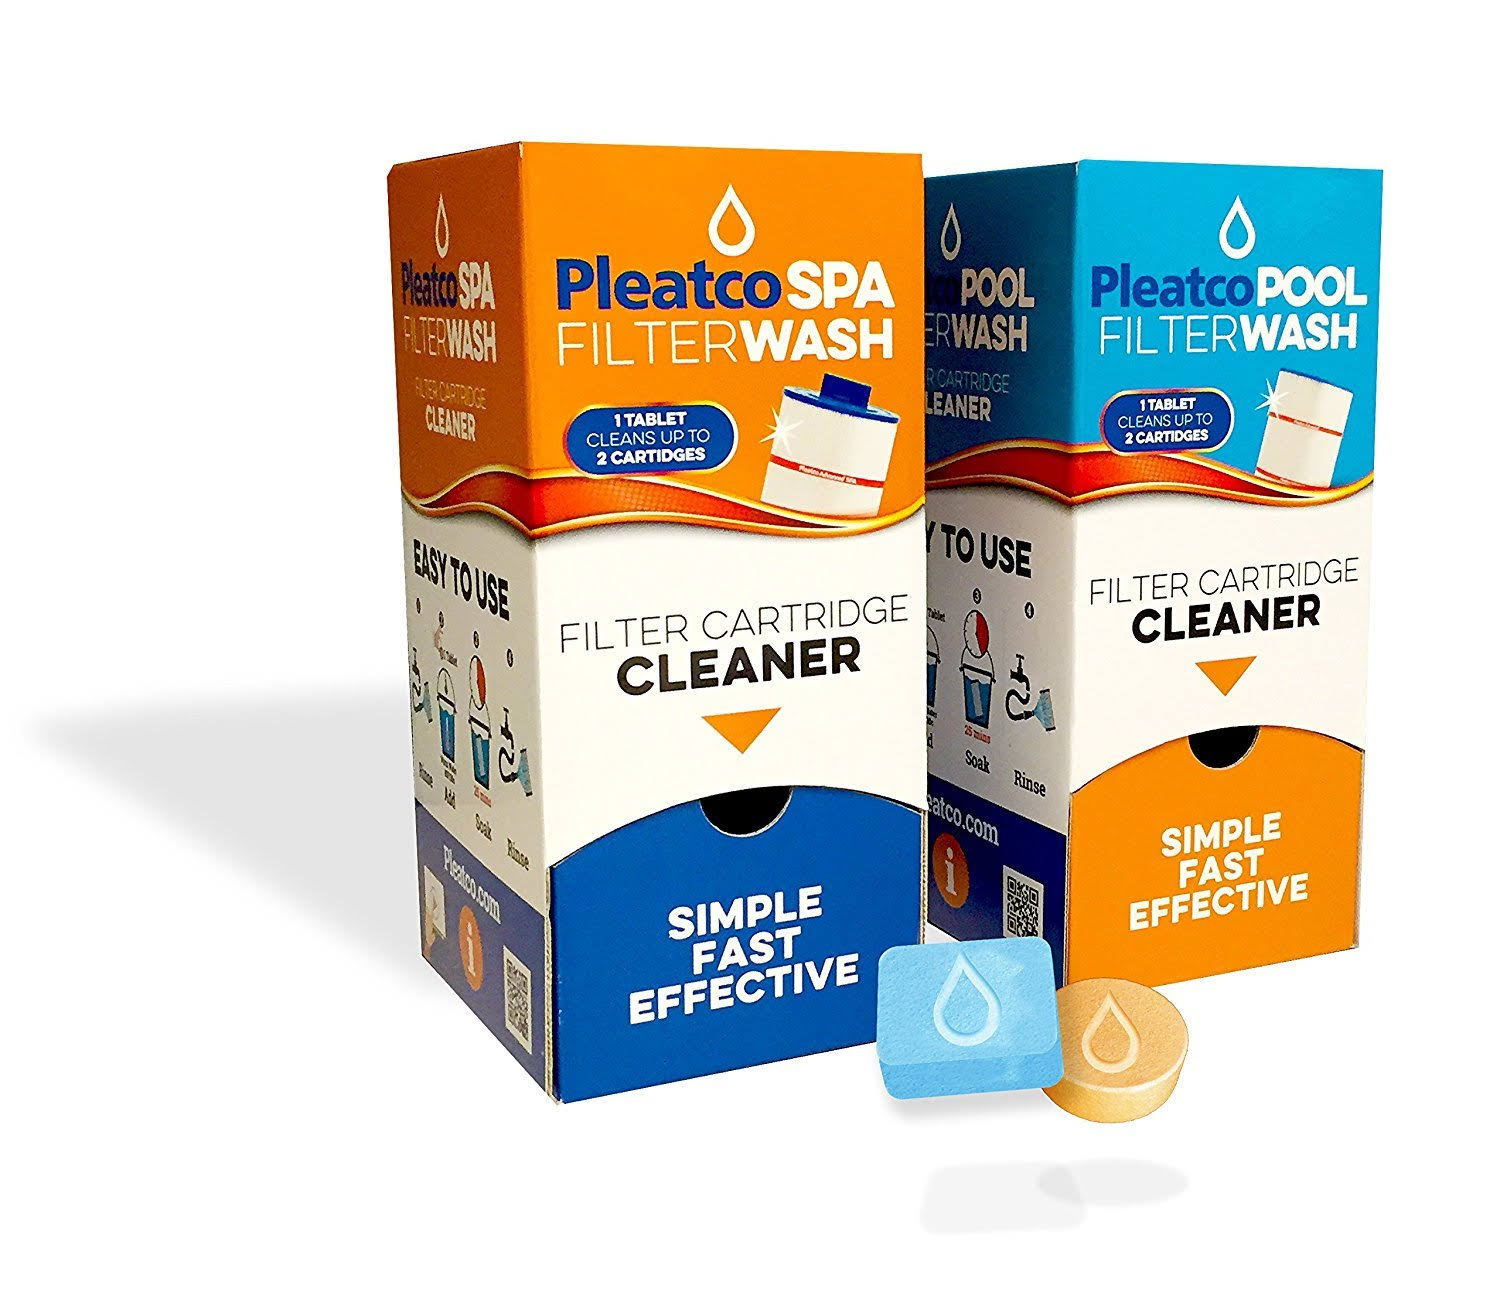 Pool Filter Wash - Filter Cartridge Cleaner Tablet by Pleatco (3)